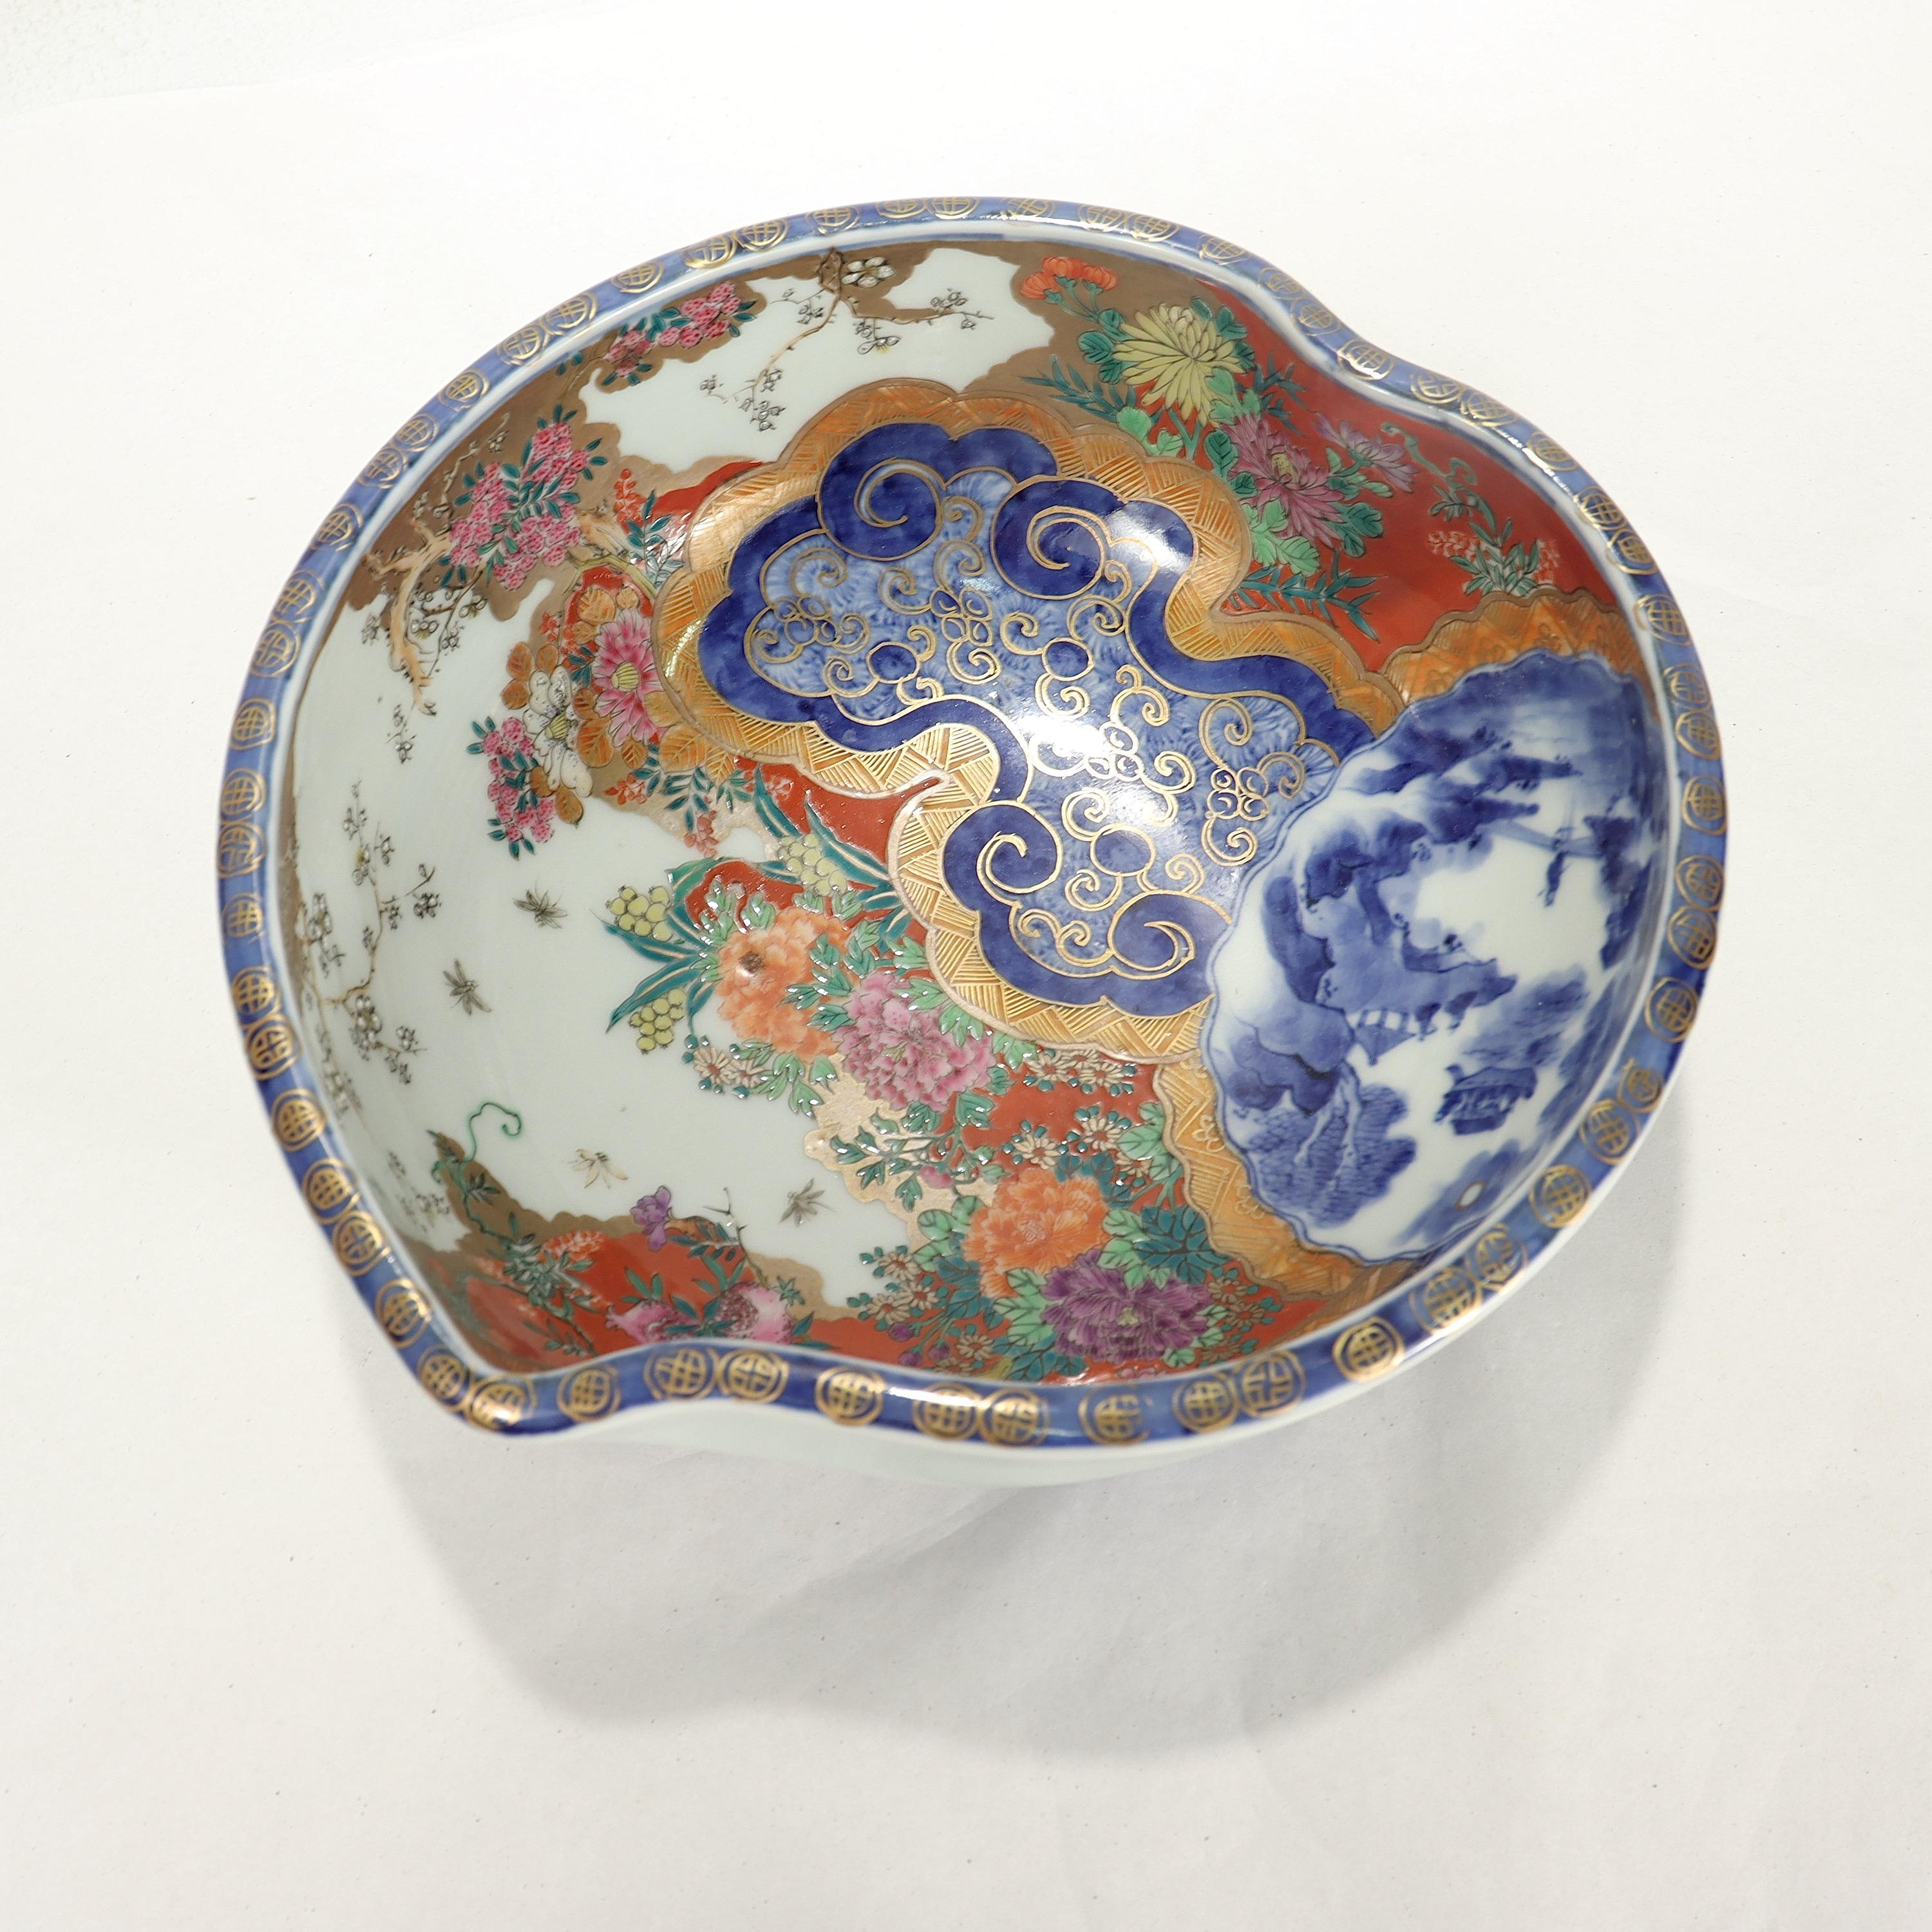 A fine antique signed Japanese Imari porcelain bowl.

In the form of a shaped bowl with a plum-like shape.

Decorated throughout with exquisitely detailed painted or enameled decoration, blue underglaze decoration, and extensive